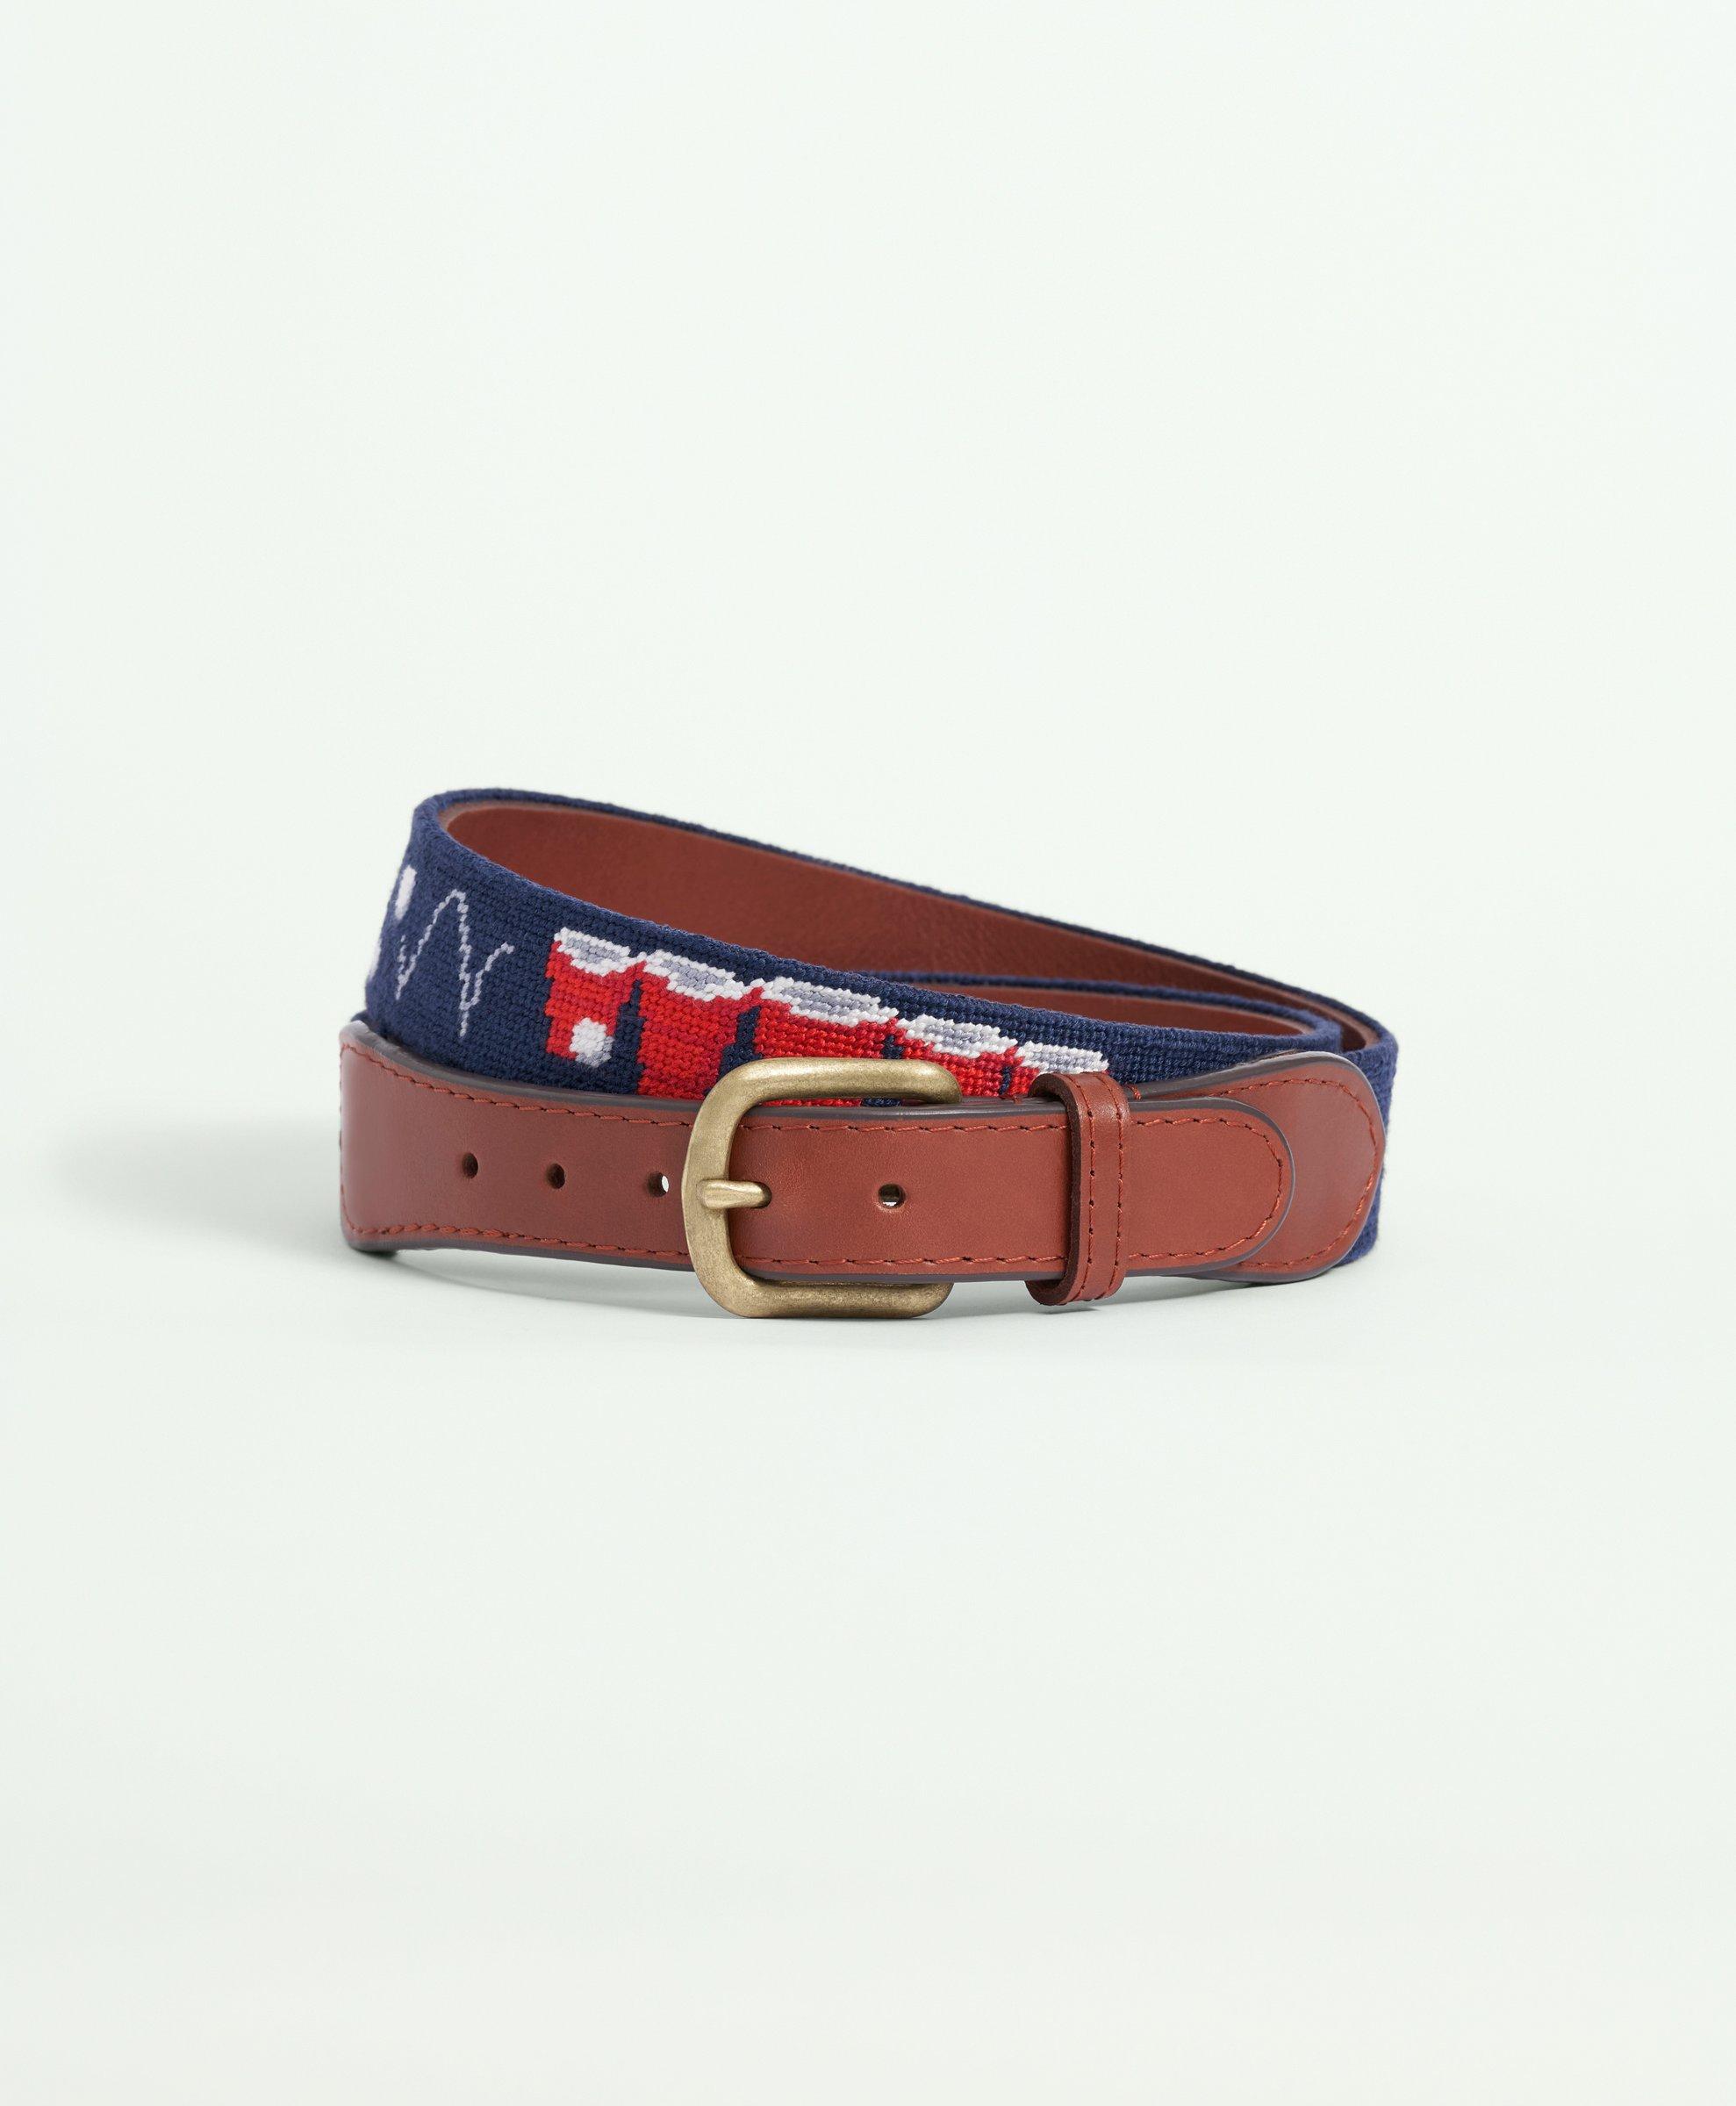 Brooks Brothers Smathers & Branson Needlepoint Belt | Size 42 In Multicolor